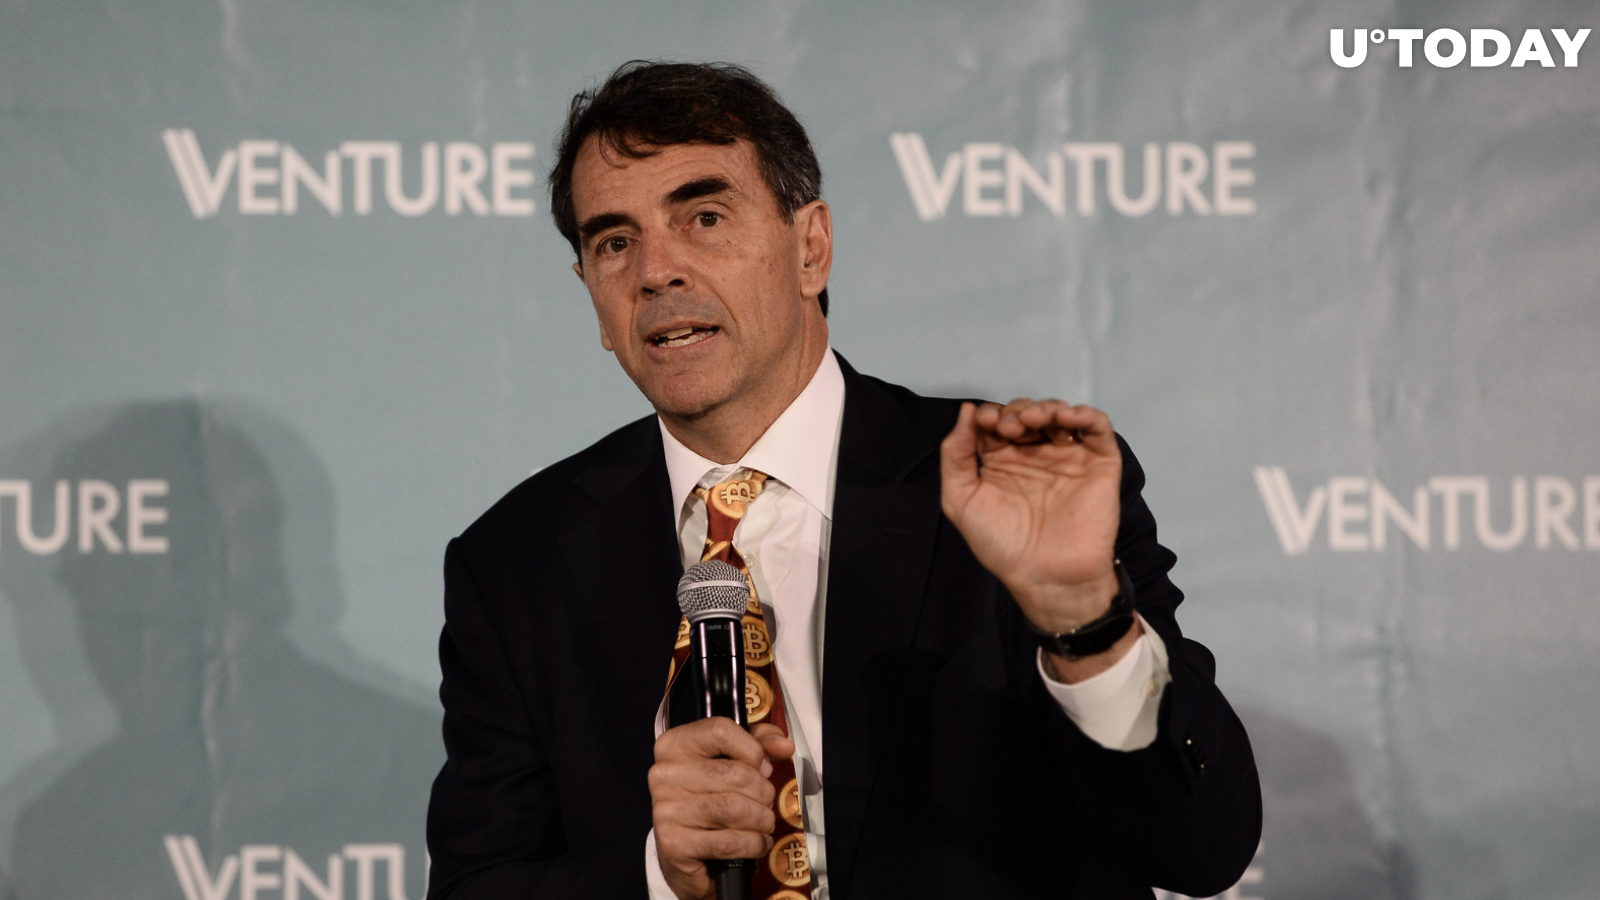 Here's When Bitcoin Might Hit $250,000, According to Tim Draper